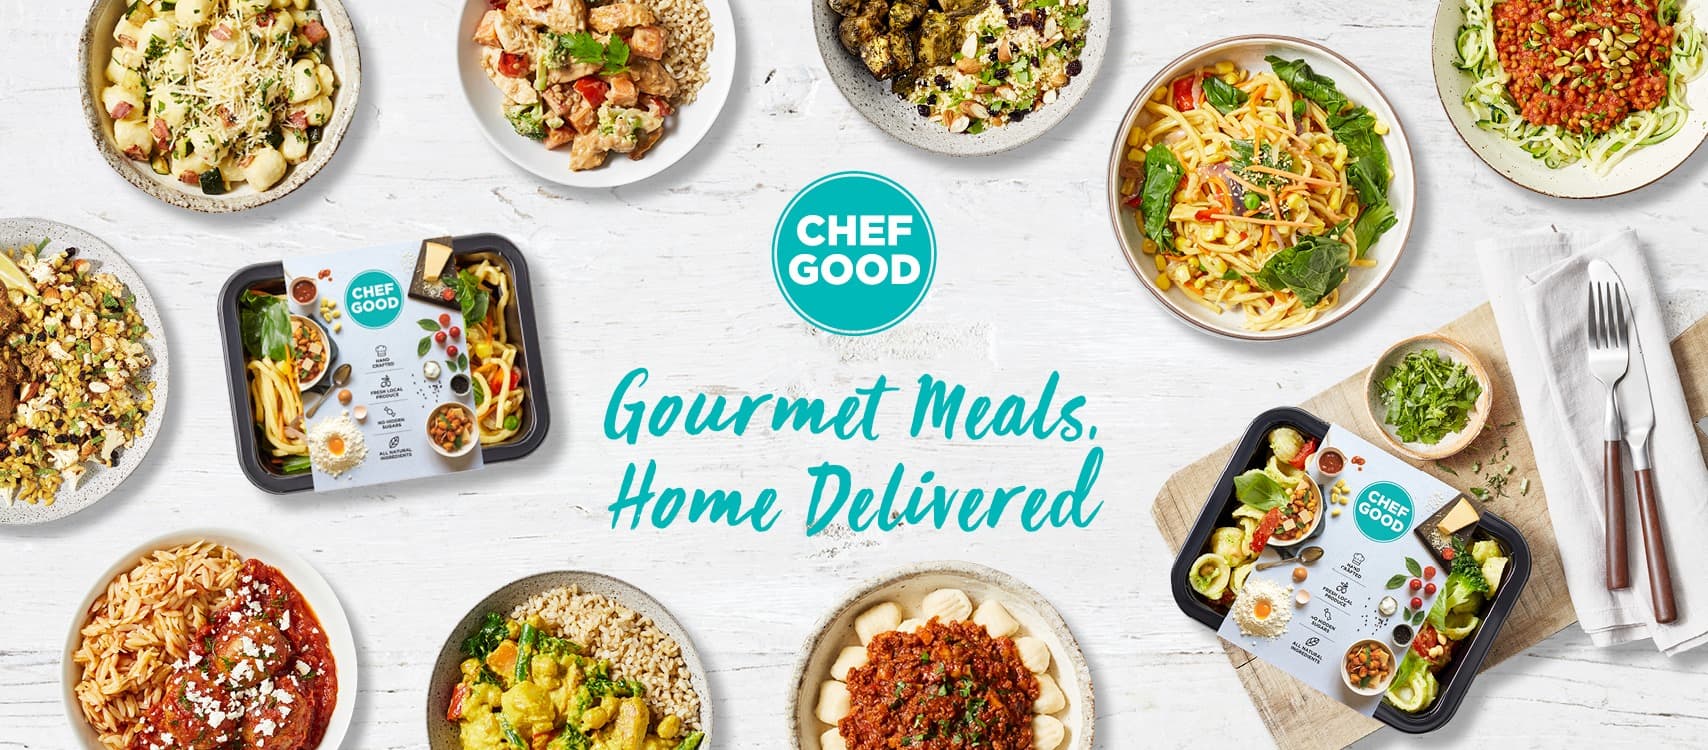 All Chefgood Promo Codes & Coupons